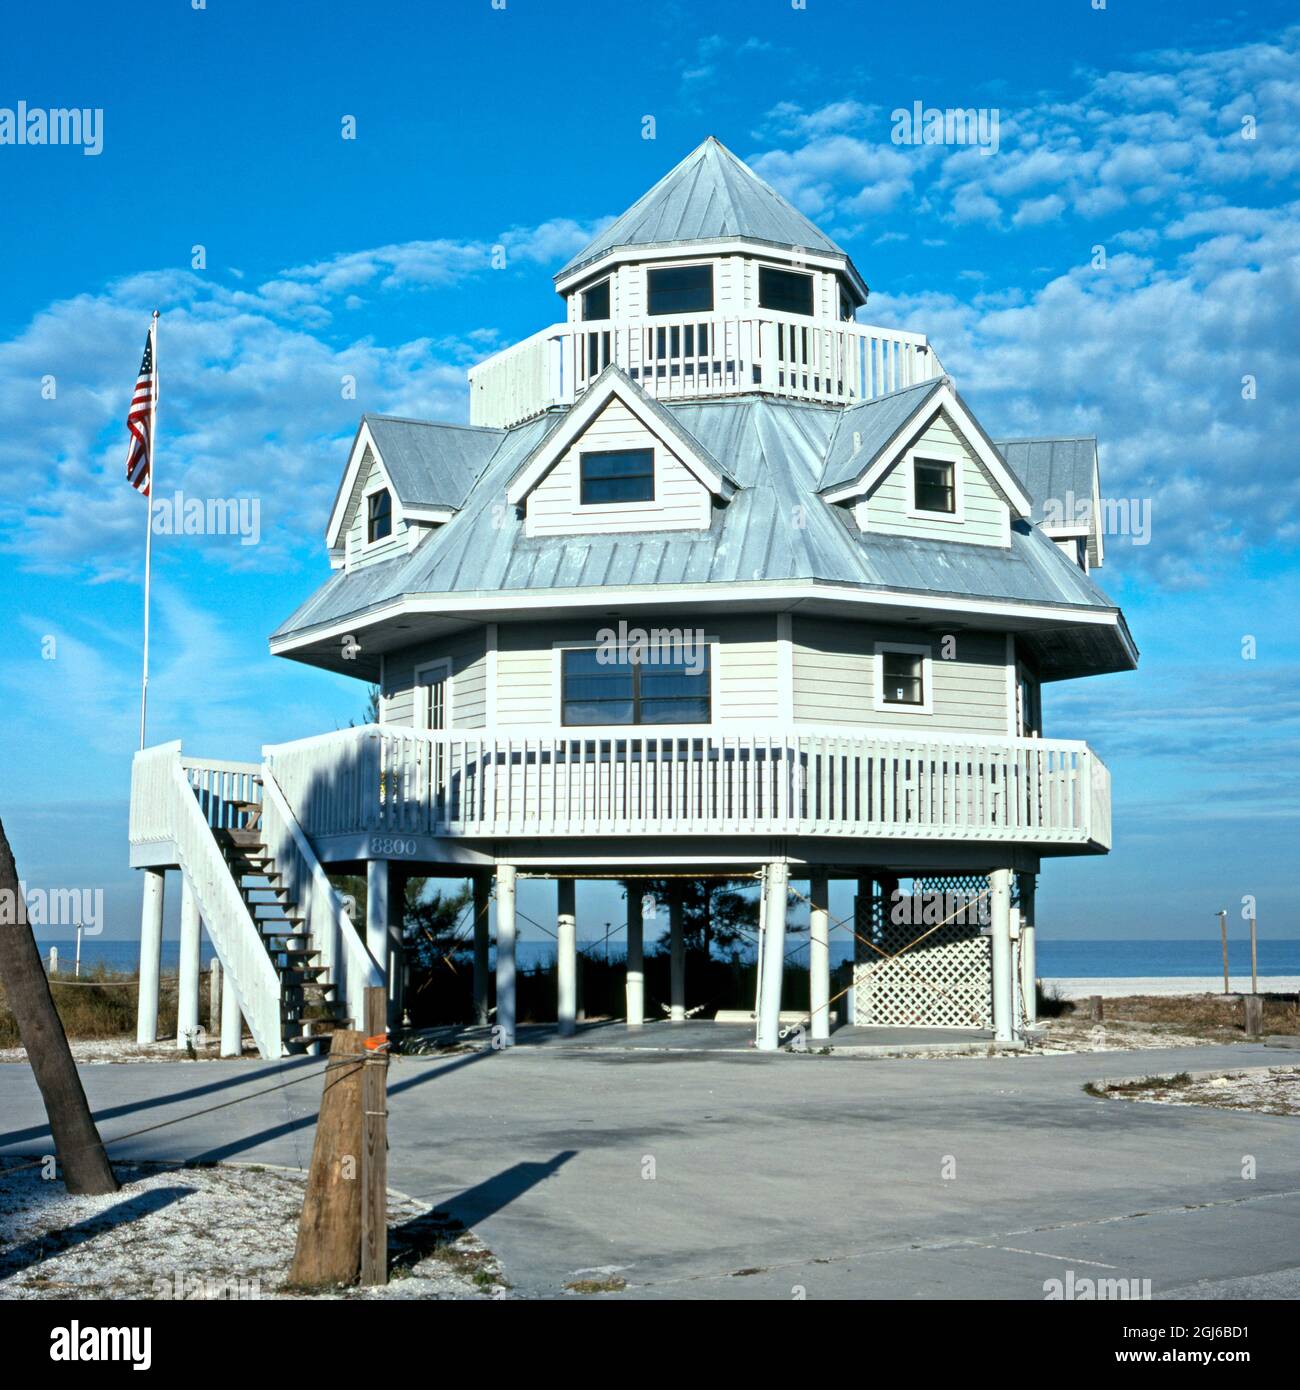 View of a tall Beach House with the sea to the rear, St. Petersburg, Florida, USA. Stock Photo